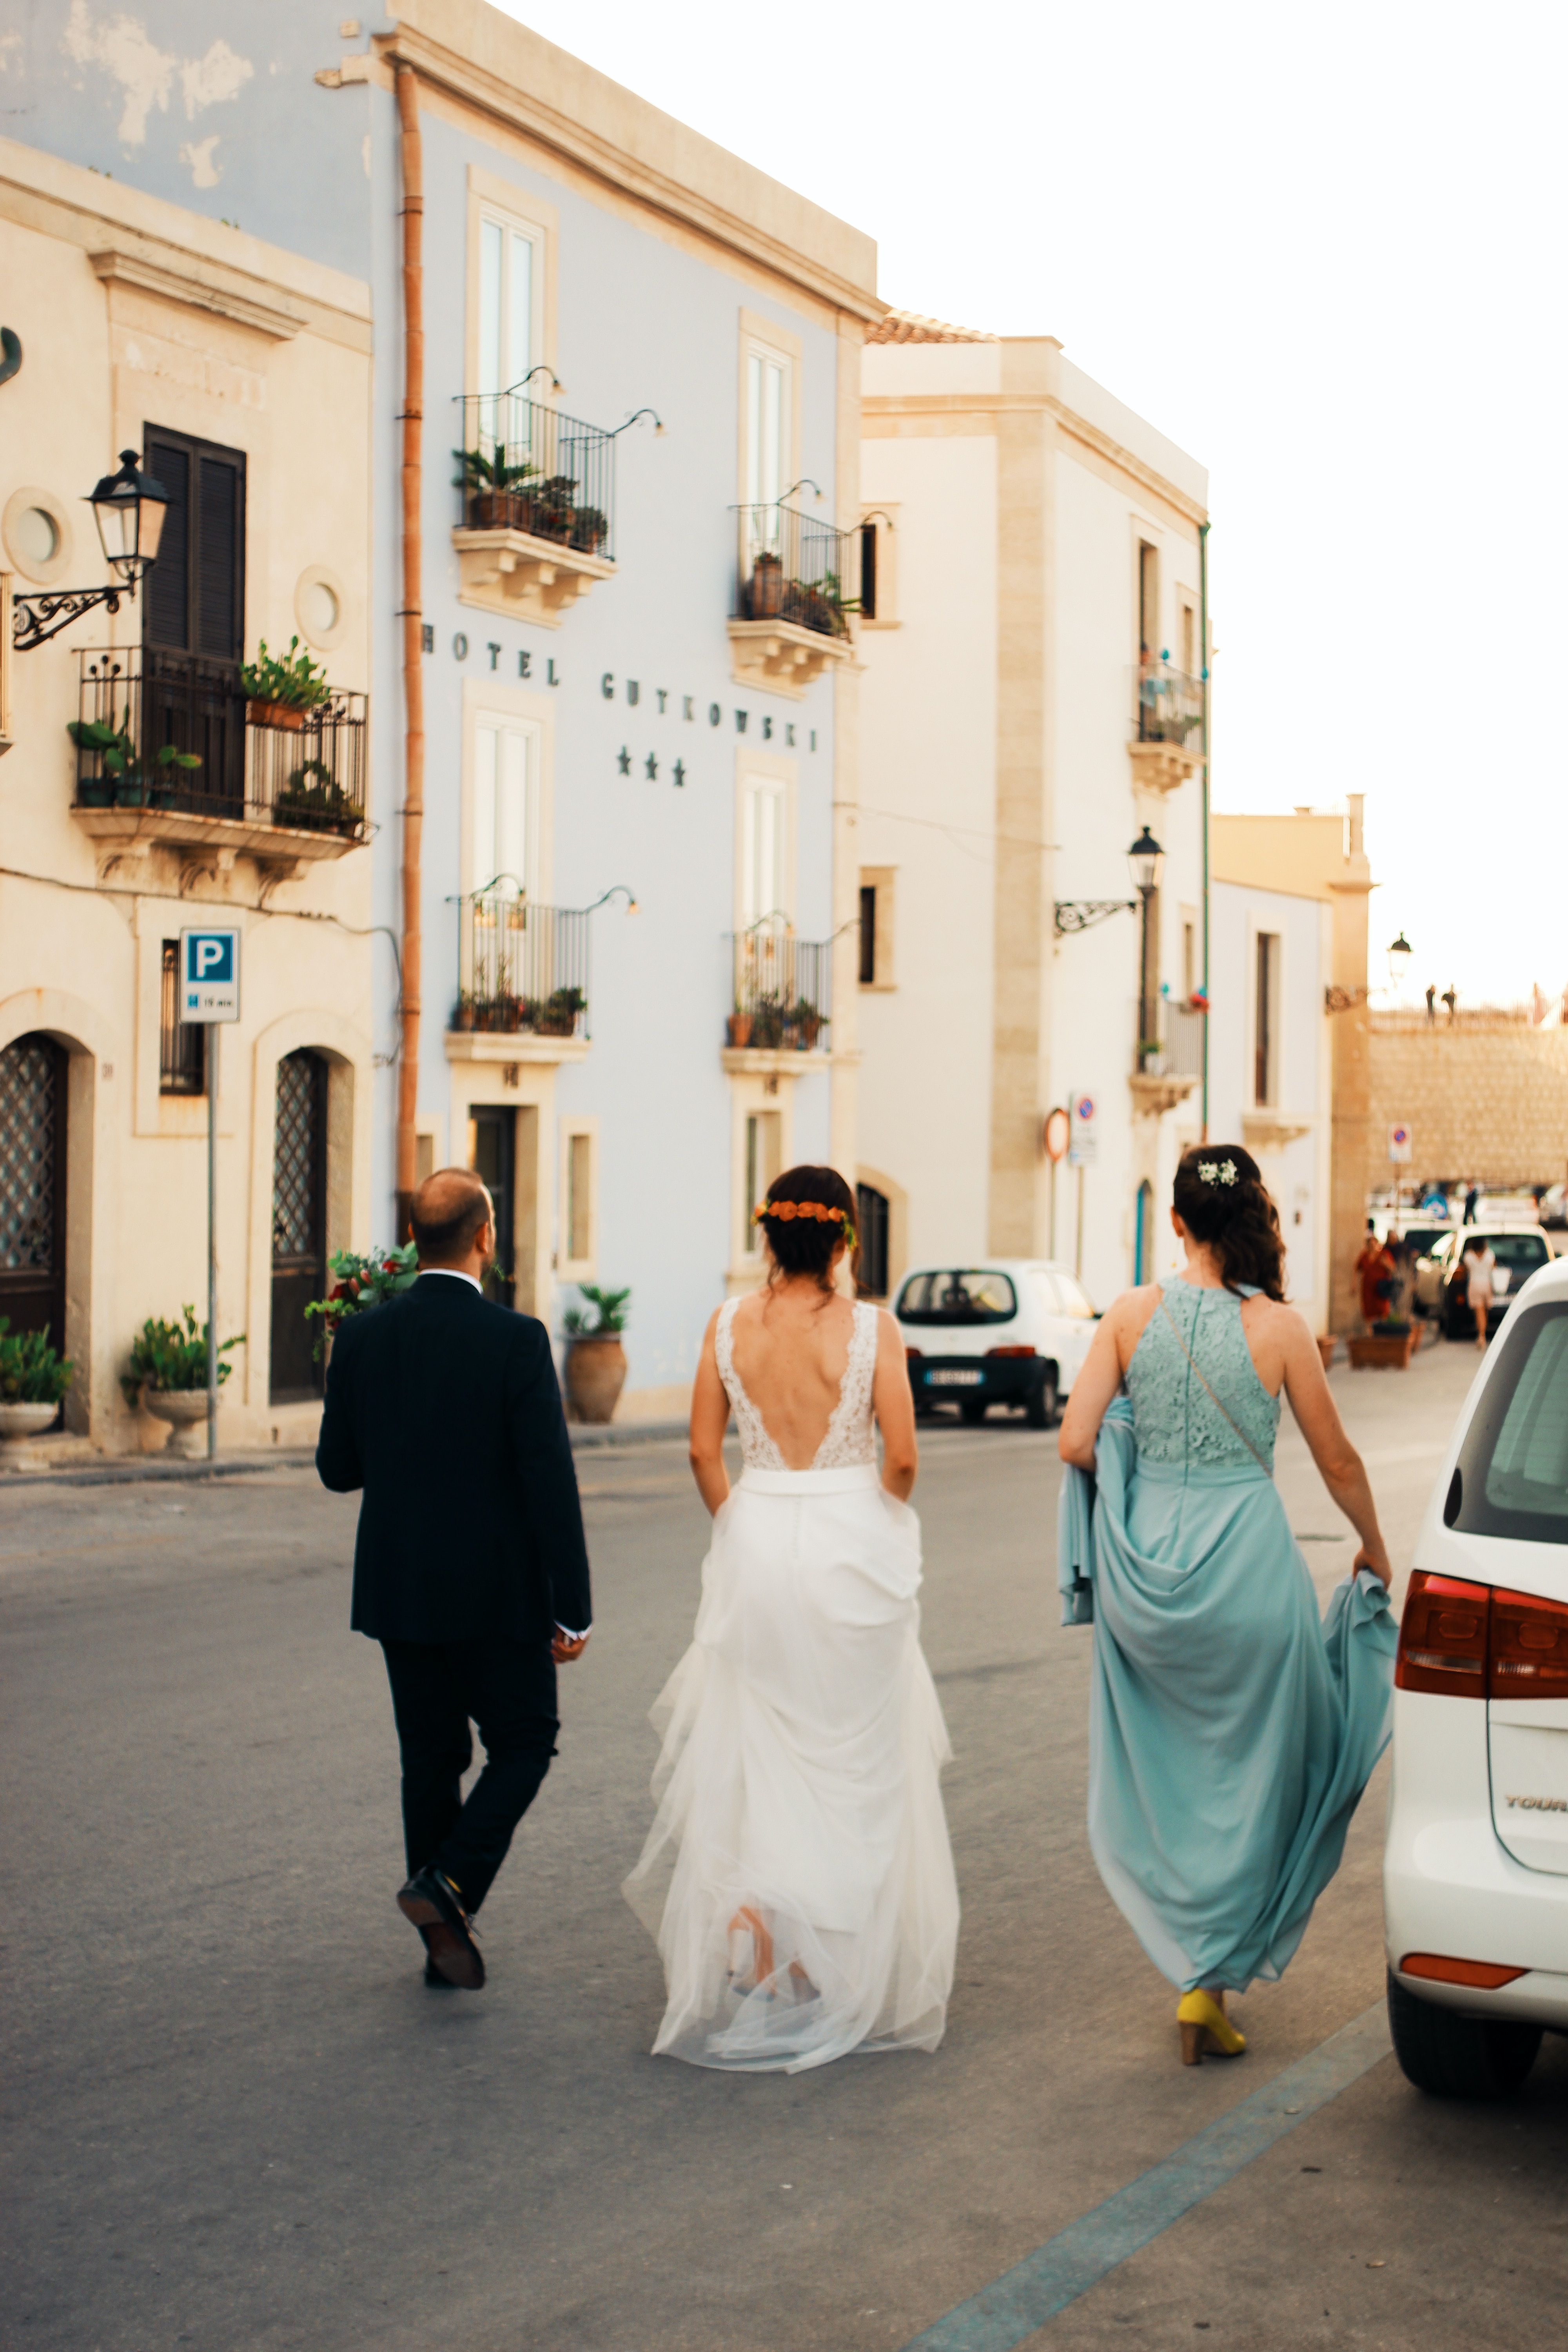 A summer wedding in Italy, newlywed couple bride and groom with bridesmaid